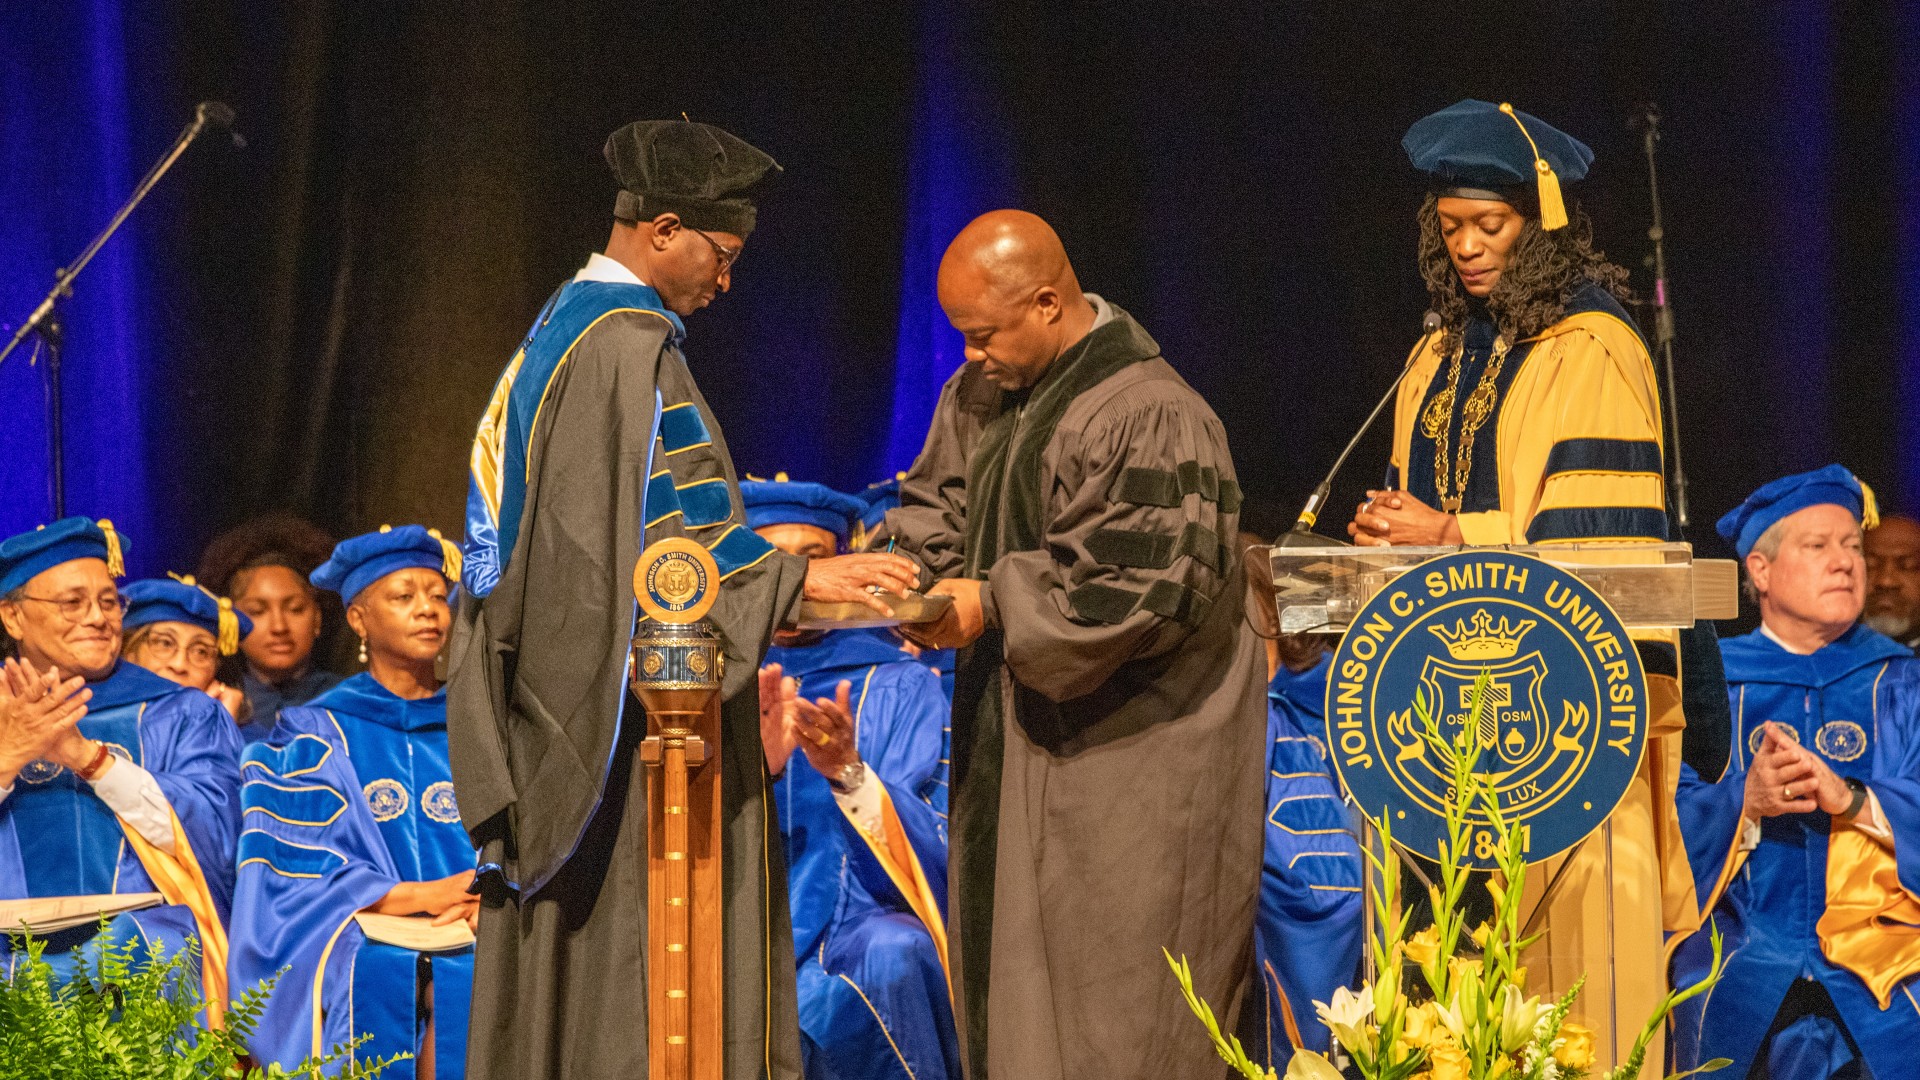 Chabot College president Dr. Jamal A. Cooks signs a memorandum of understanding between his college and JCSU during the Inauguration Ceremony